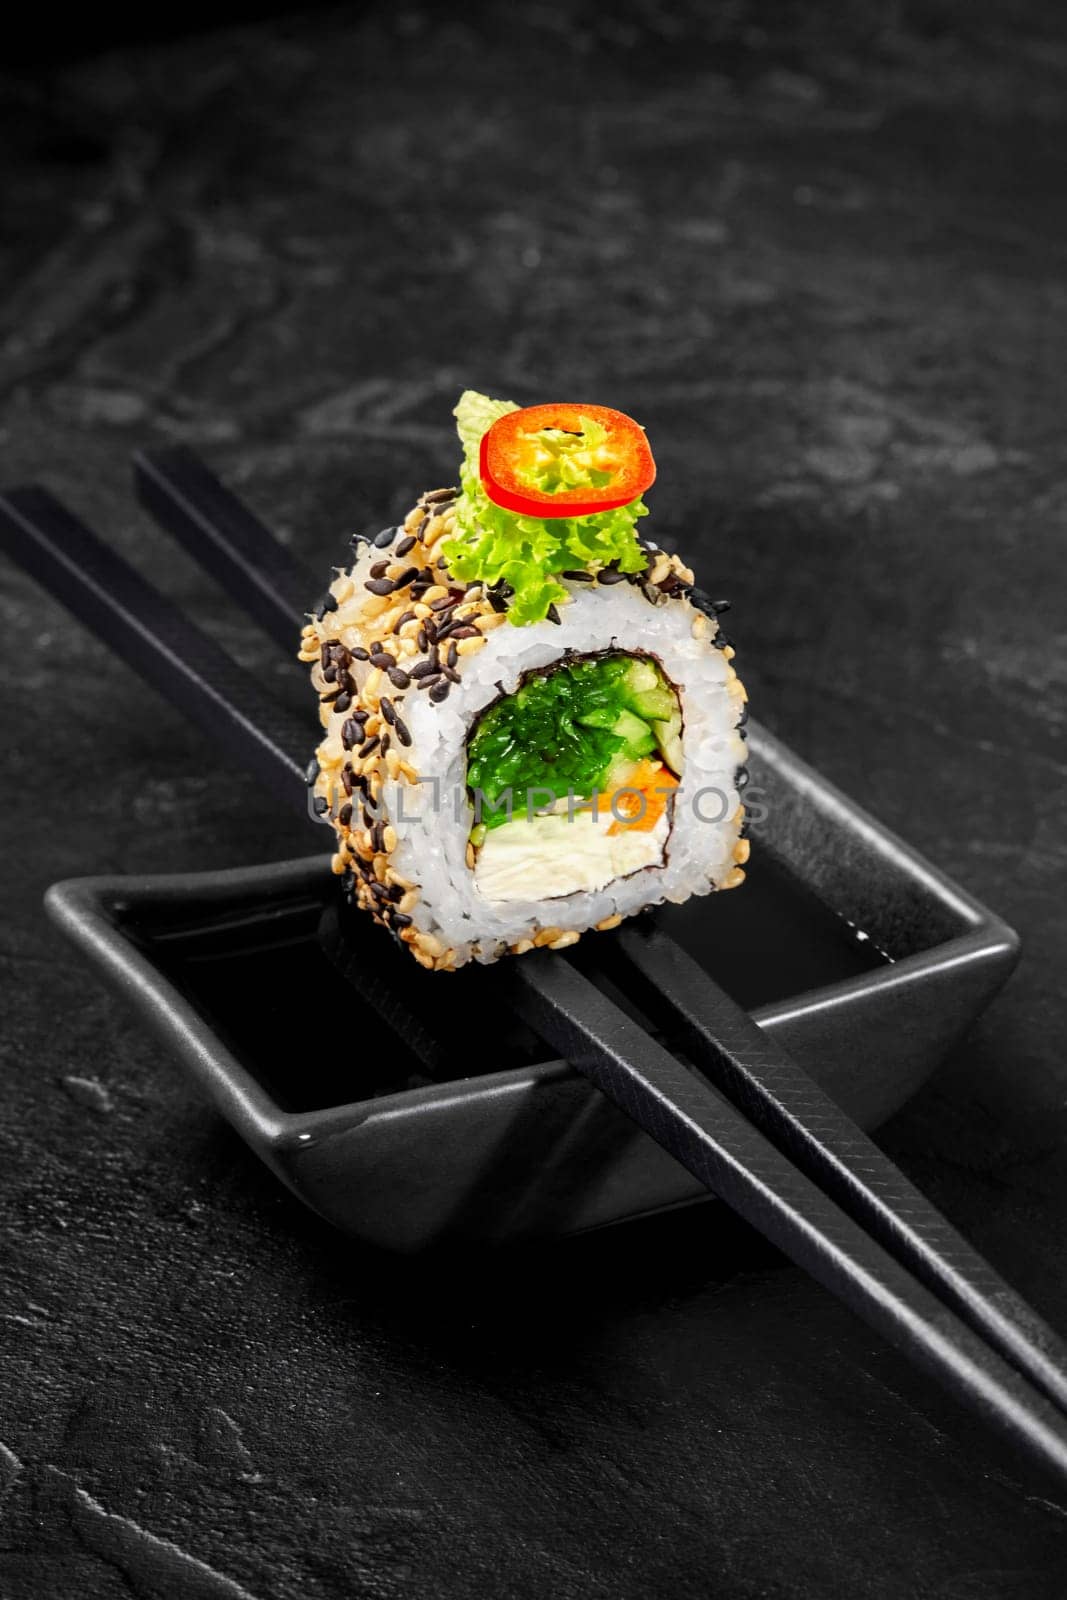 Vegetarian sushi roll with light filling of cream cheese, carrot, hiyashi wakame, lettuce and cucumber adorned with sesame seeds and chili, perfectly balanced on chopsticks over soy sauce dish